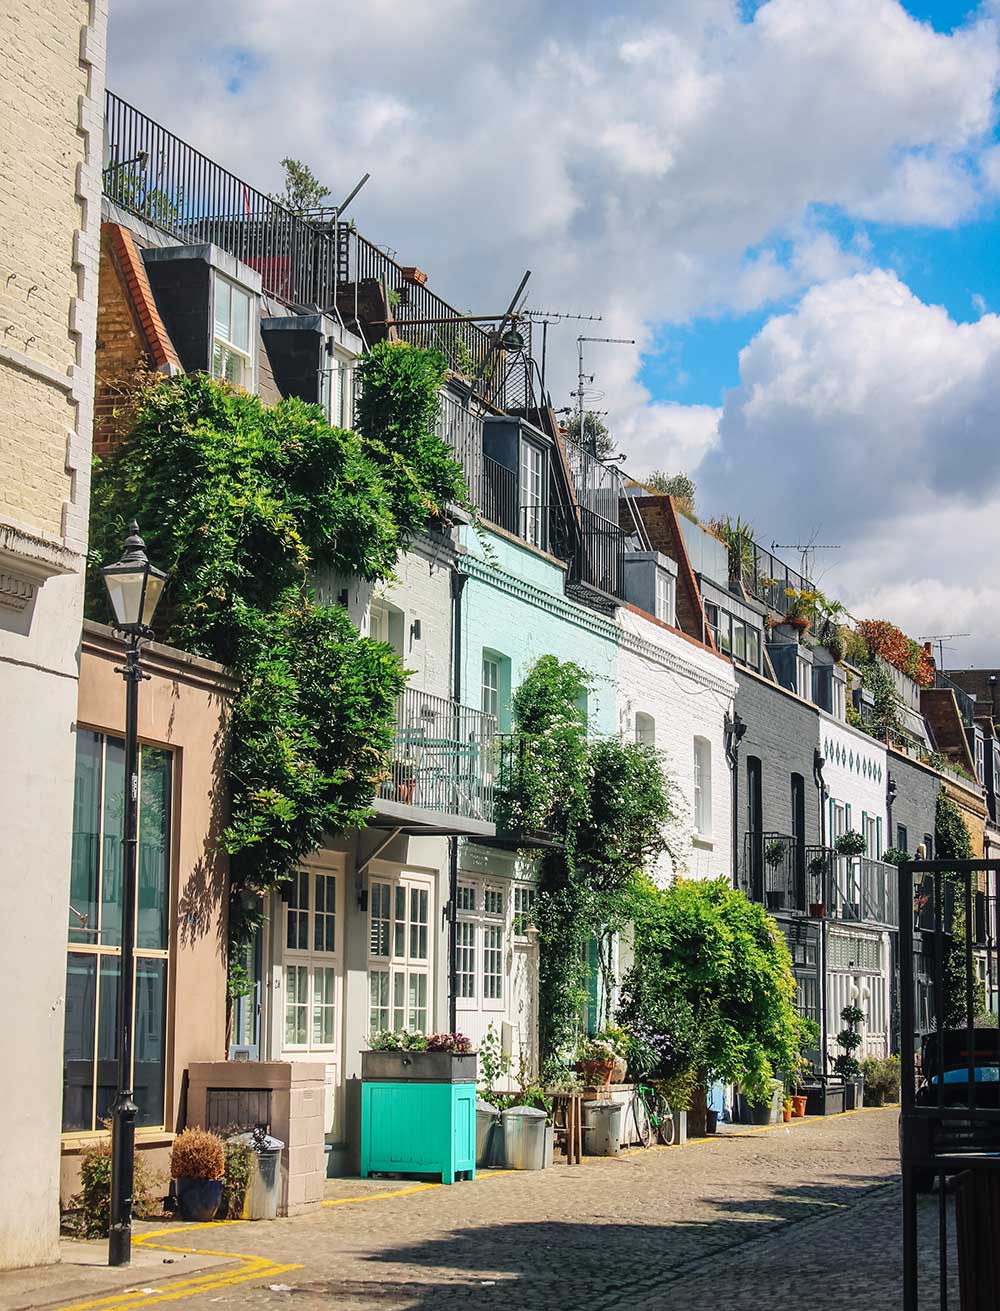 St Lukes Mews - Instagrammable Places in London - Best Photo Spots